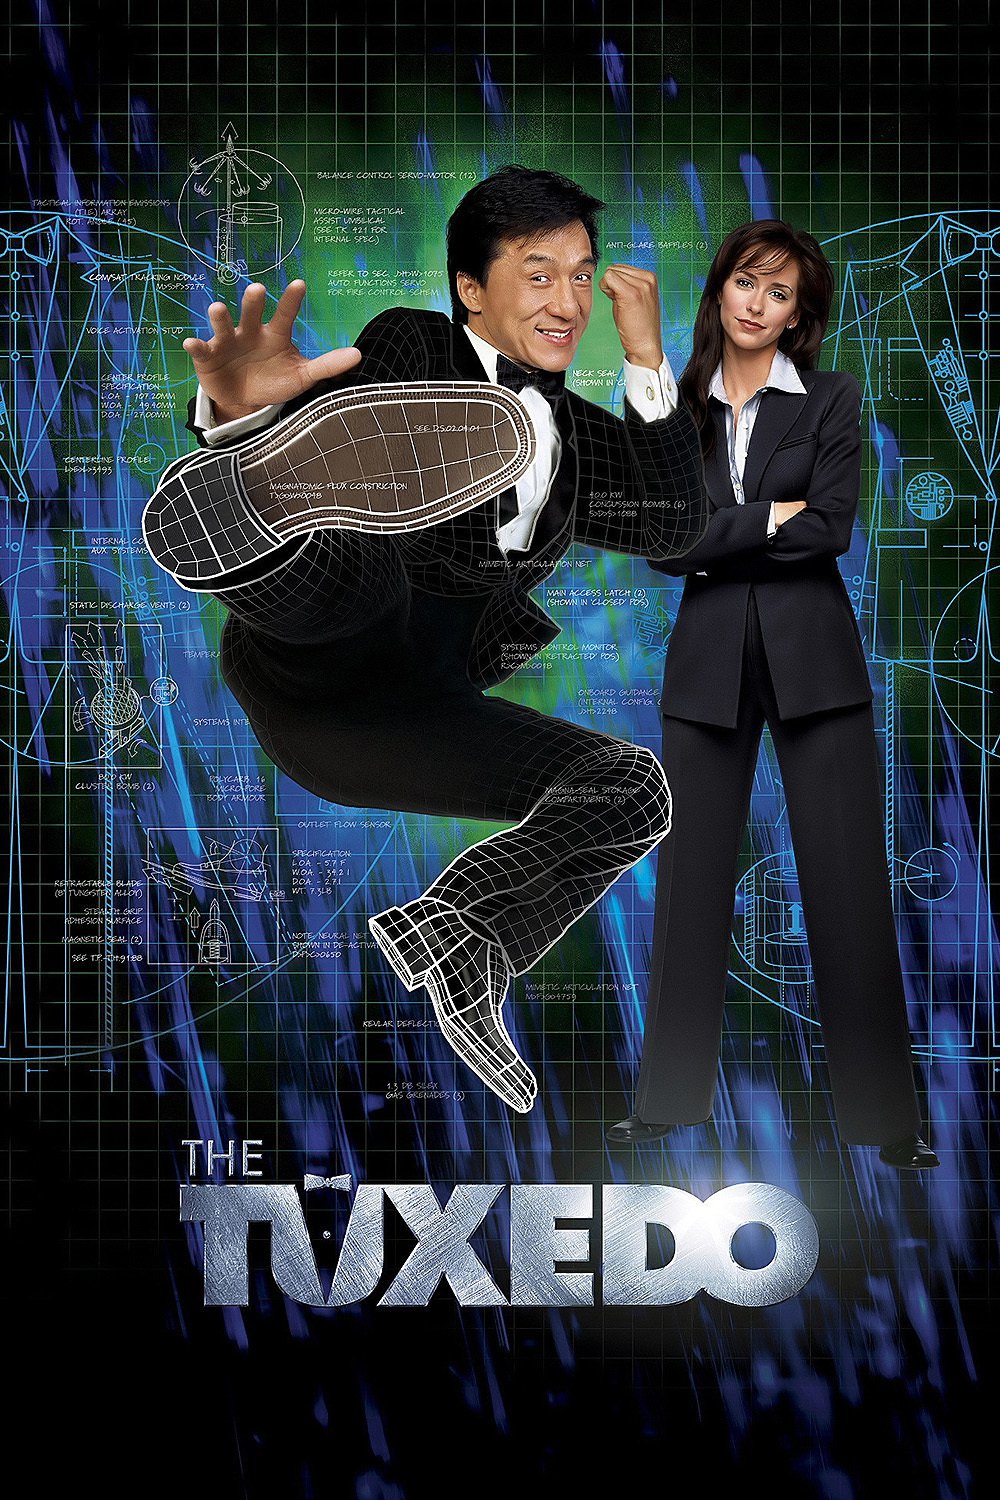 Poster for the movie "The Tuxedo"